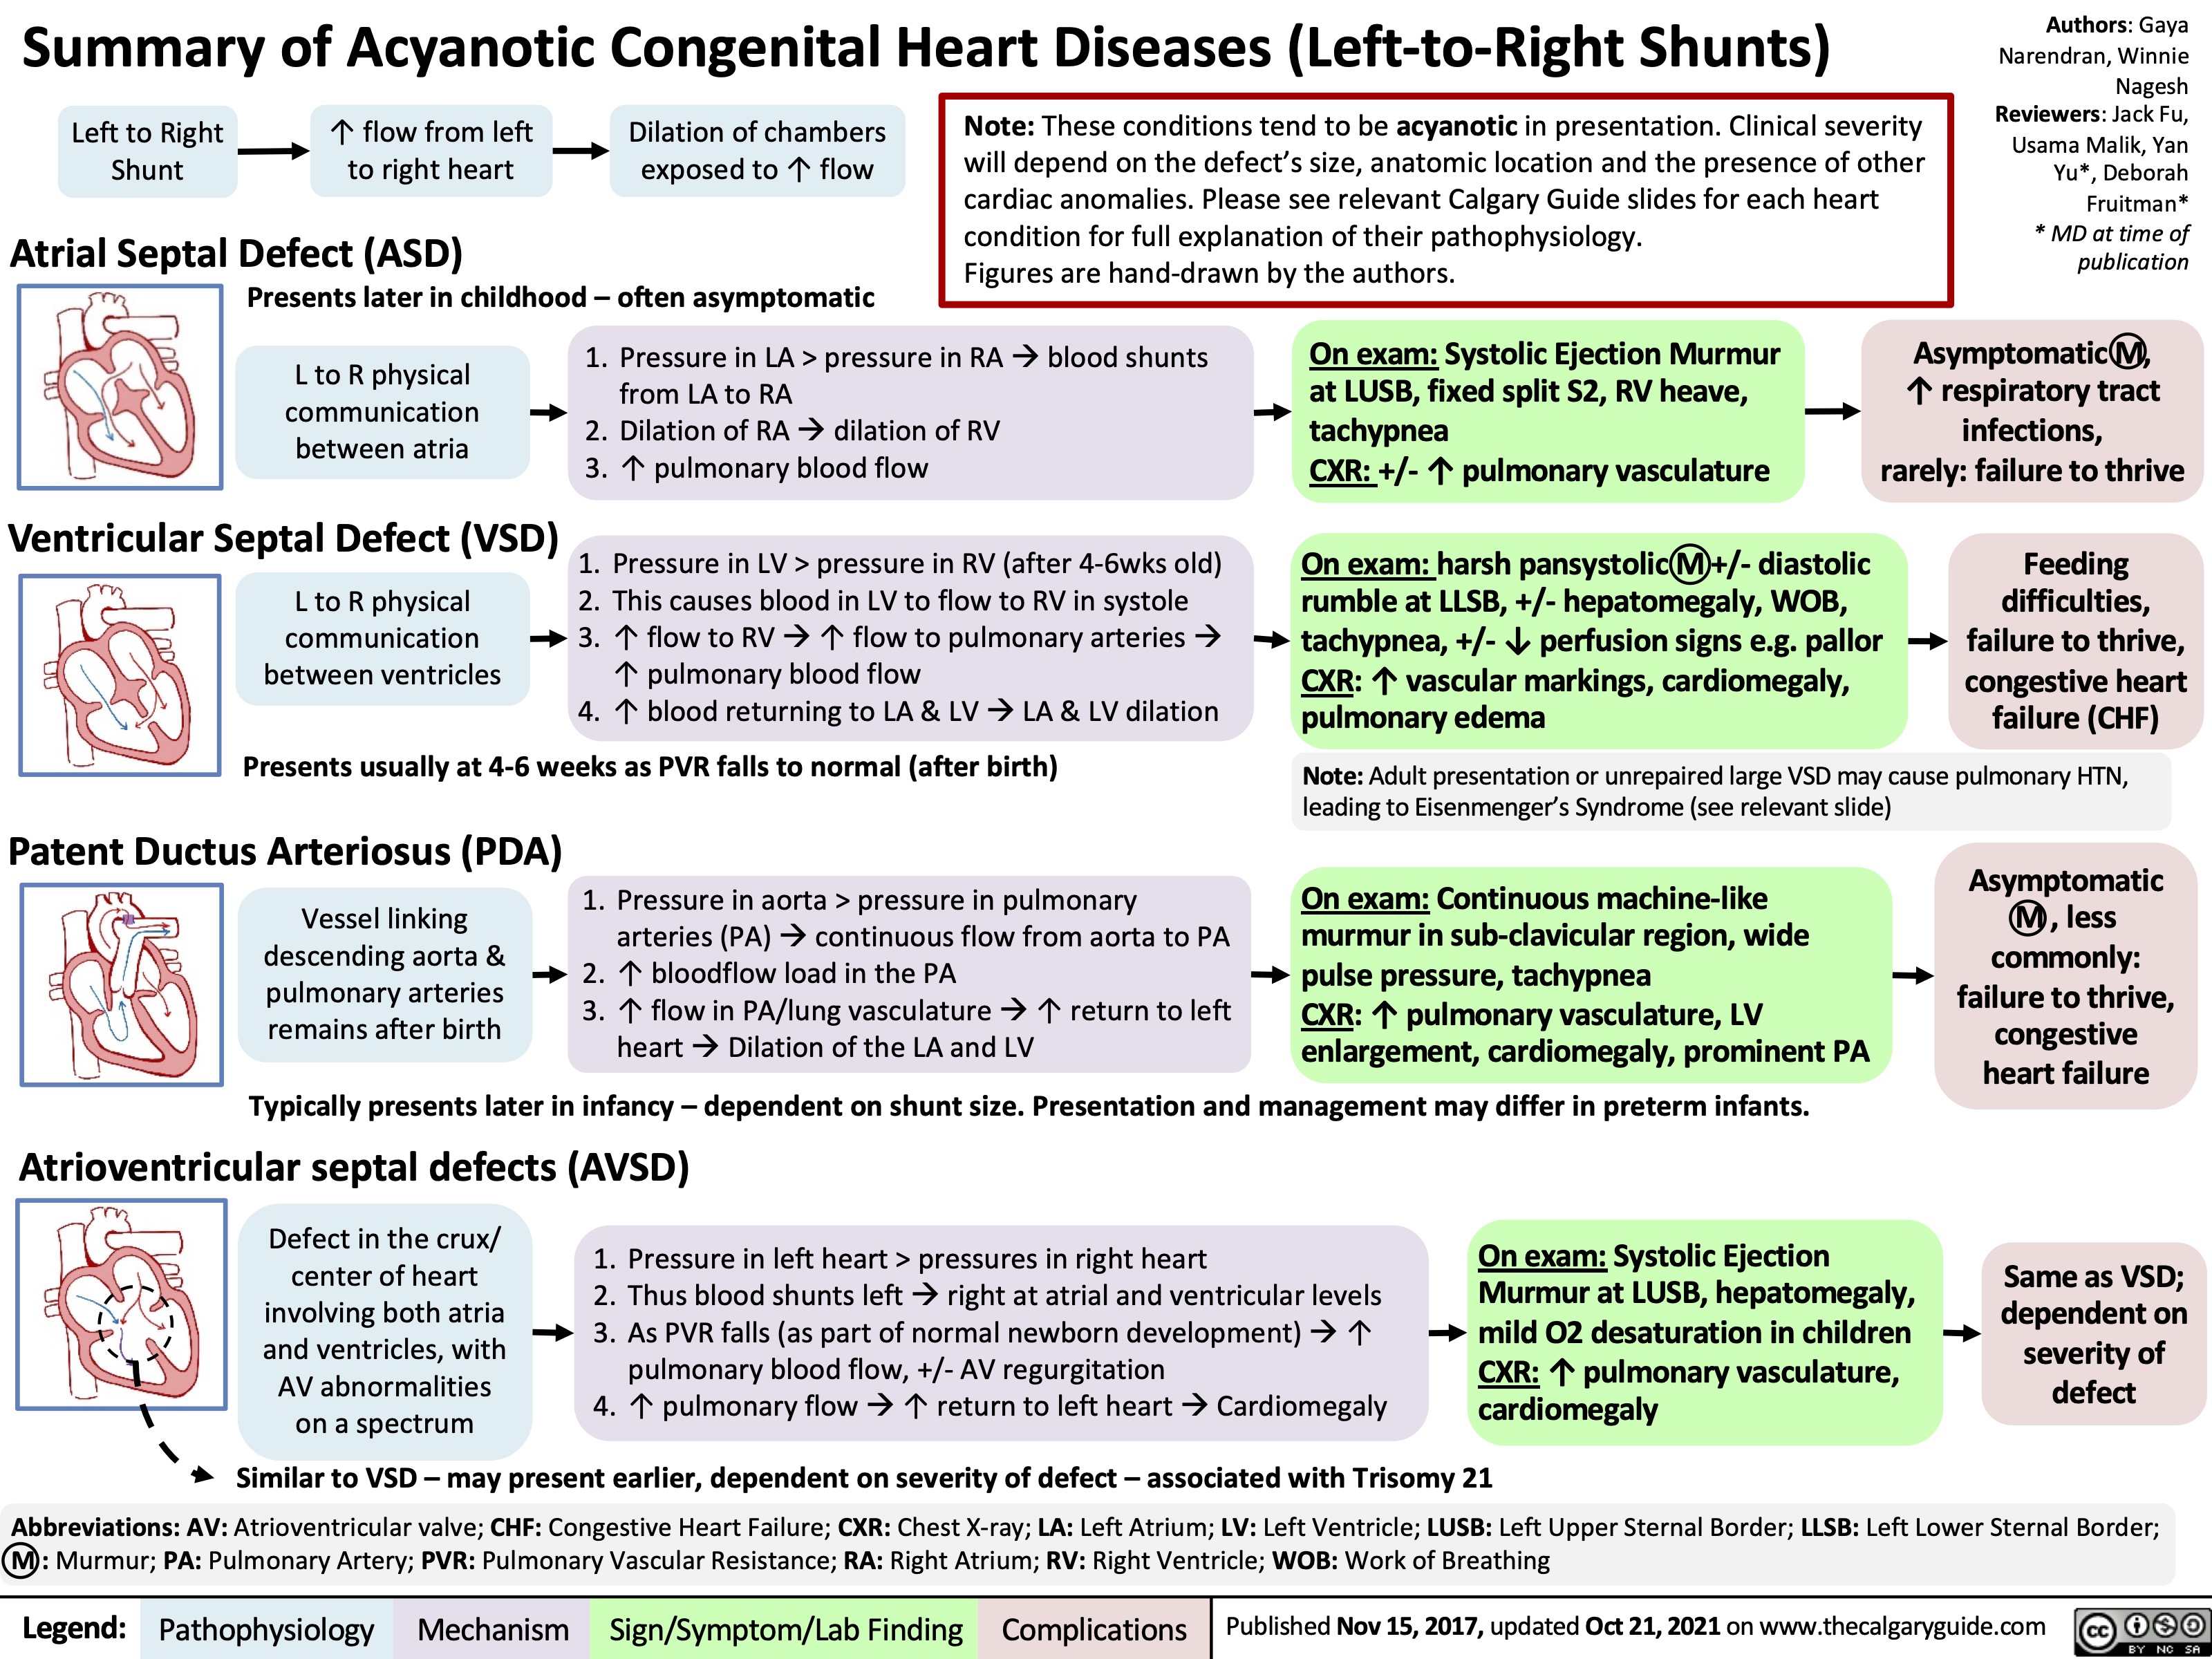 Summary of Acyanotic Congenital Heart Diseases (Left-to-Right Shunts)
Authors: Gaya Narendran, Winnie Nagesh Reviewers: Jack Fu, Usama Malik, Yan Yu*, Deborah Fruitman* * MD at time of publication
Asymptomatic M, ↑ respiratory tract infections, rarely: failure to thrive
    Left to Right Shunt
↑ flow from left to right heart
Dilation of chambers exposed to ↑ flow
Atrial Septal Defect (ASD)
Presents later in childhood – often asymptomatic
Note: These conditions tend to be acyanotic in presentation. Clinical severity will depend on the defect’s size, anatomic location and the presence of other cardiac anomalies. Please see relevant Calgary Guide slides for each heart condition for full explanation of their pathophysiology.
Figures are hand-drawn by the authors.
     L to R physical communication between atria
1. Pressure in LA > pressure in RA à blood shunts from LA to RA
2. Dilation of RAàdilation of RV 3. ↑ pulmonary blood flow
On exam: Systolic Ejection Murmur at LUSB, fixed split S2, RV heave, tachypnea
CXR: +/- ↑ pulmonary vasculature
 Ventricular Septal Defect (VSD) 1. Pressure in LV > pressure in RV (after 4-6wks old)
On exam: harsh pansystolic M +/- diastolic rumble at LLSB, +/- hepatomegaly, WOB, tachypnea, +/- ↓ perfusion signs e.g. pallor CXR: ↑ vascular markings, cardiomegaly, pulmonary edema
Feeding difficulties, failure to thrive, congestive heart failure (CHF)
      L to R physical communication between ventricles
2. This causes blood in LV to flow to RV in systole
3. ↑ flow to RVà↑ flow to pulmonary arteriesà
↑ pulmonary blood flow
4. ↑ blood returning to LA & LVàLA & LV dilation
Presents usually at 4-6 weeks as PVR falls to normal (after birth) Patent Ductus Arteriosus (PDA)
1. Pressure in aorta > pressure in pulmonary arteries (PA) à continuous flow from aorta to PA
2. ↑ bloodflow load in the PA
3. ↑ flow in PA/lung vasculature à ↑ return to left
Note: Adult presentation or unrepaired large VSD may cause pulmonary HTN, leading to Eisenmenger’s Syndrome (see relevant slide)
      Vessel linking descending aorta & pulmonary arteries remains after birth
On exam: Continuous machine-like murmur in sub-clavicular region, wide pulse pressure, tachypnea
CXR: ↑ pulmonary vasculature, LV enlargement, cardiomegaly, prominent PA
Asymptomatic M , less commonly: failure to thrive, congestive heart failure
 heart à Dilation of the LA and LV
Typically presents later in infancy – dependent on shunt size. Presentation and management may differ in preterm infants.
Atrioventricular septal defects (AVSD)
  Defect in the crux/ center of heart involving both atria and ventricles, with AV abnormalities on a spectrum
1. Pressure in left heart > pressures in right heart
2. Thus blood shunts left à right at atrial and ventricular levels 3. As PVR falls (as part of normal newborn development) à ↑
pulmonary blood flow, +/- AV regurgitation
4. ↑ pulmonary flow à ↑ return to left heart à Cardiomegaly
On exam: Systolic Ejection
Murmur at LUSB, hepatomegaly,
mild O2 desaturation in children
CXR: ↑ pulmonary vasculature,
cardiomegaly defect
   Similar to VSD – may present earlier, dependent on severity of defect – associated with Trisomy 21
Abbreviations: AV: Atrioventricular valve; CHF: Congestive Heart Failure; CXR: Chest X-ray; LA: Left Atrium; LV: Left Ventricle; LUSB: Left Upper Sternal Border; LLSB: Left Lower Sternal Border; M : Murmur; PA: Pulmonary Artery; PVR: Pulmonary Vascular Resistance; RA: Right Atrium; RV: Right Ventricle; WOB: Work of Breathing
Same as VSD; dependent on severity of
    Legend:
 Pathophysiology
 Mechanism
Sign/Symptom/Lab Finding
 Complications
 Published Nov 15, 2017, updated Oct 21, 2021 on www.thecalgaryguide.com
  